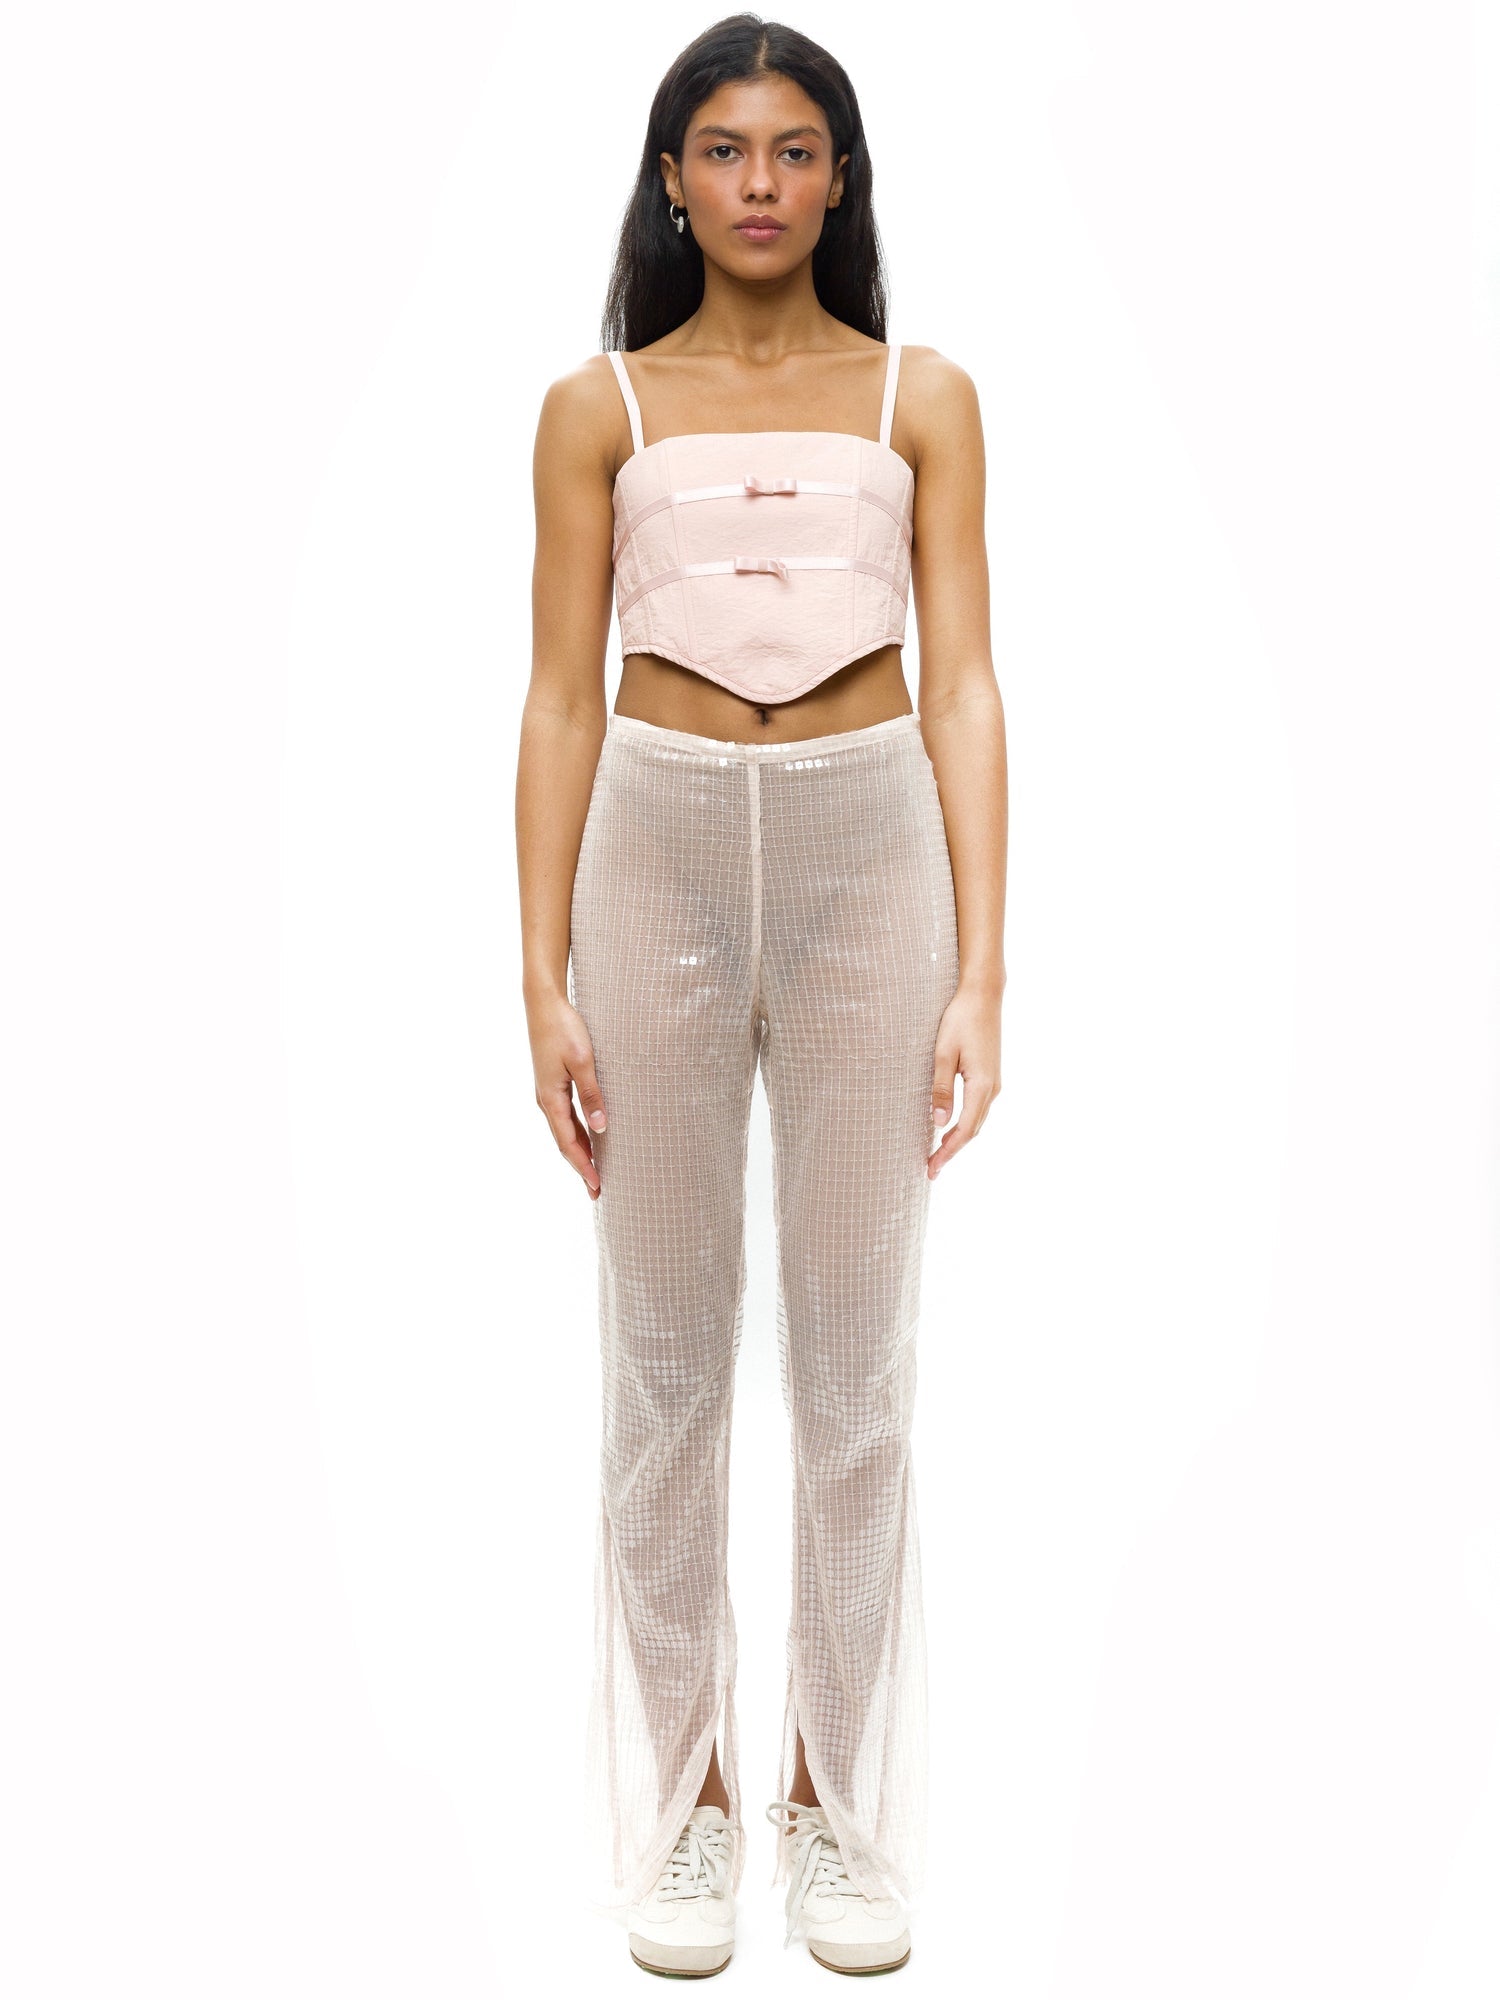 ALICE K - Sequins Trousers, buy at DOORS NYC